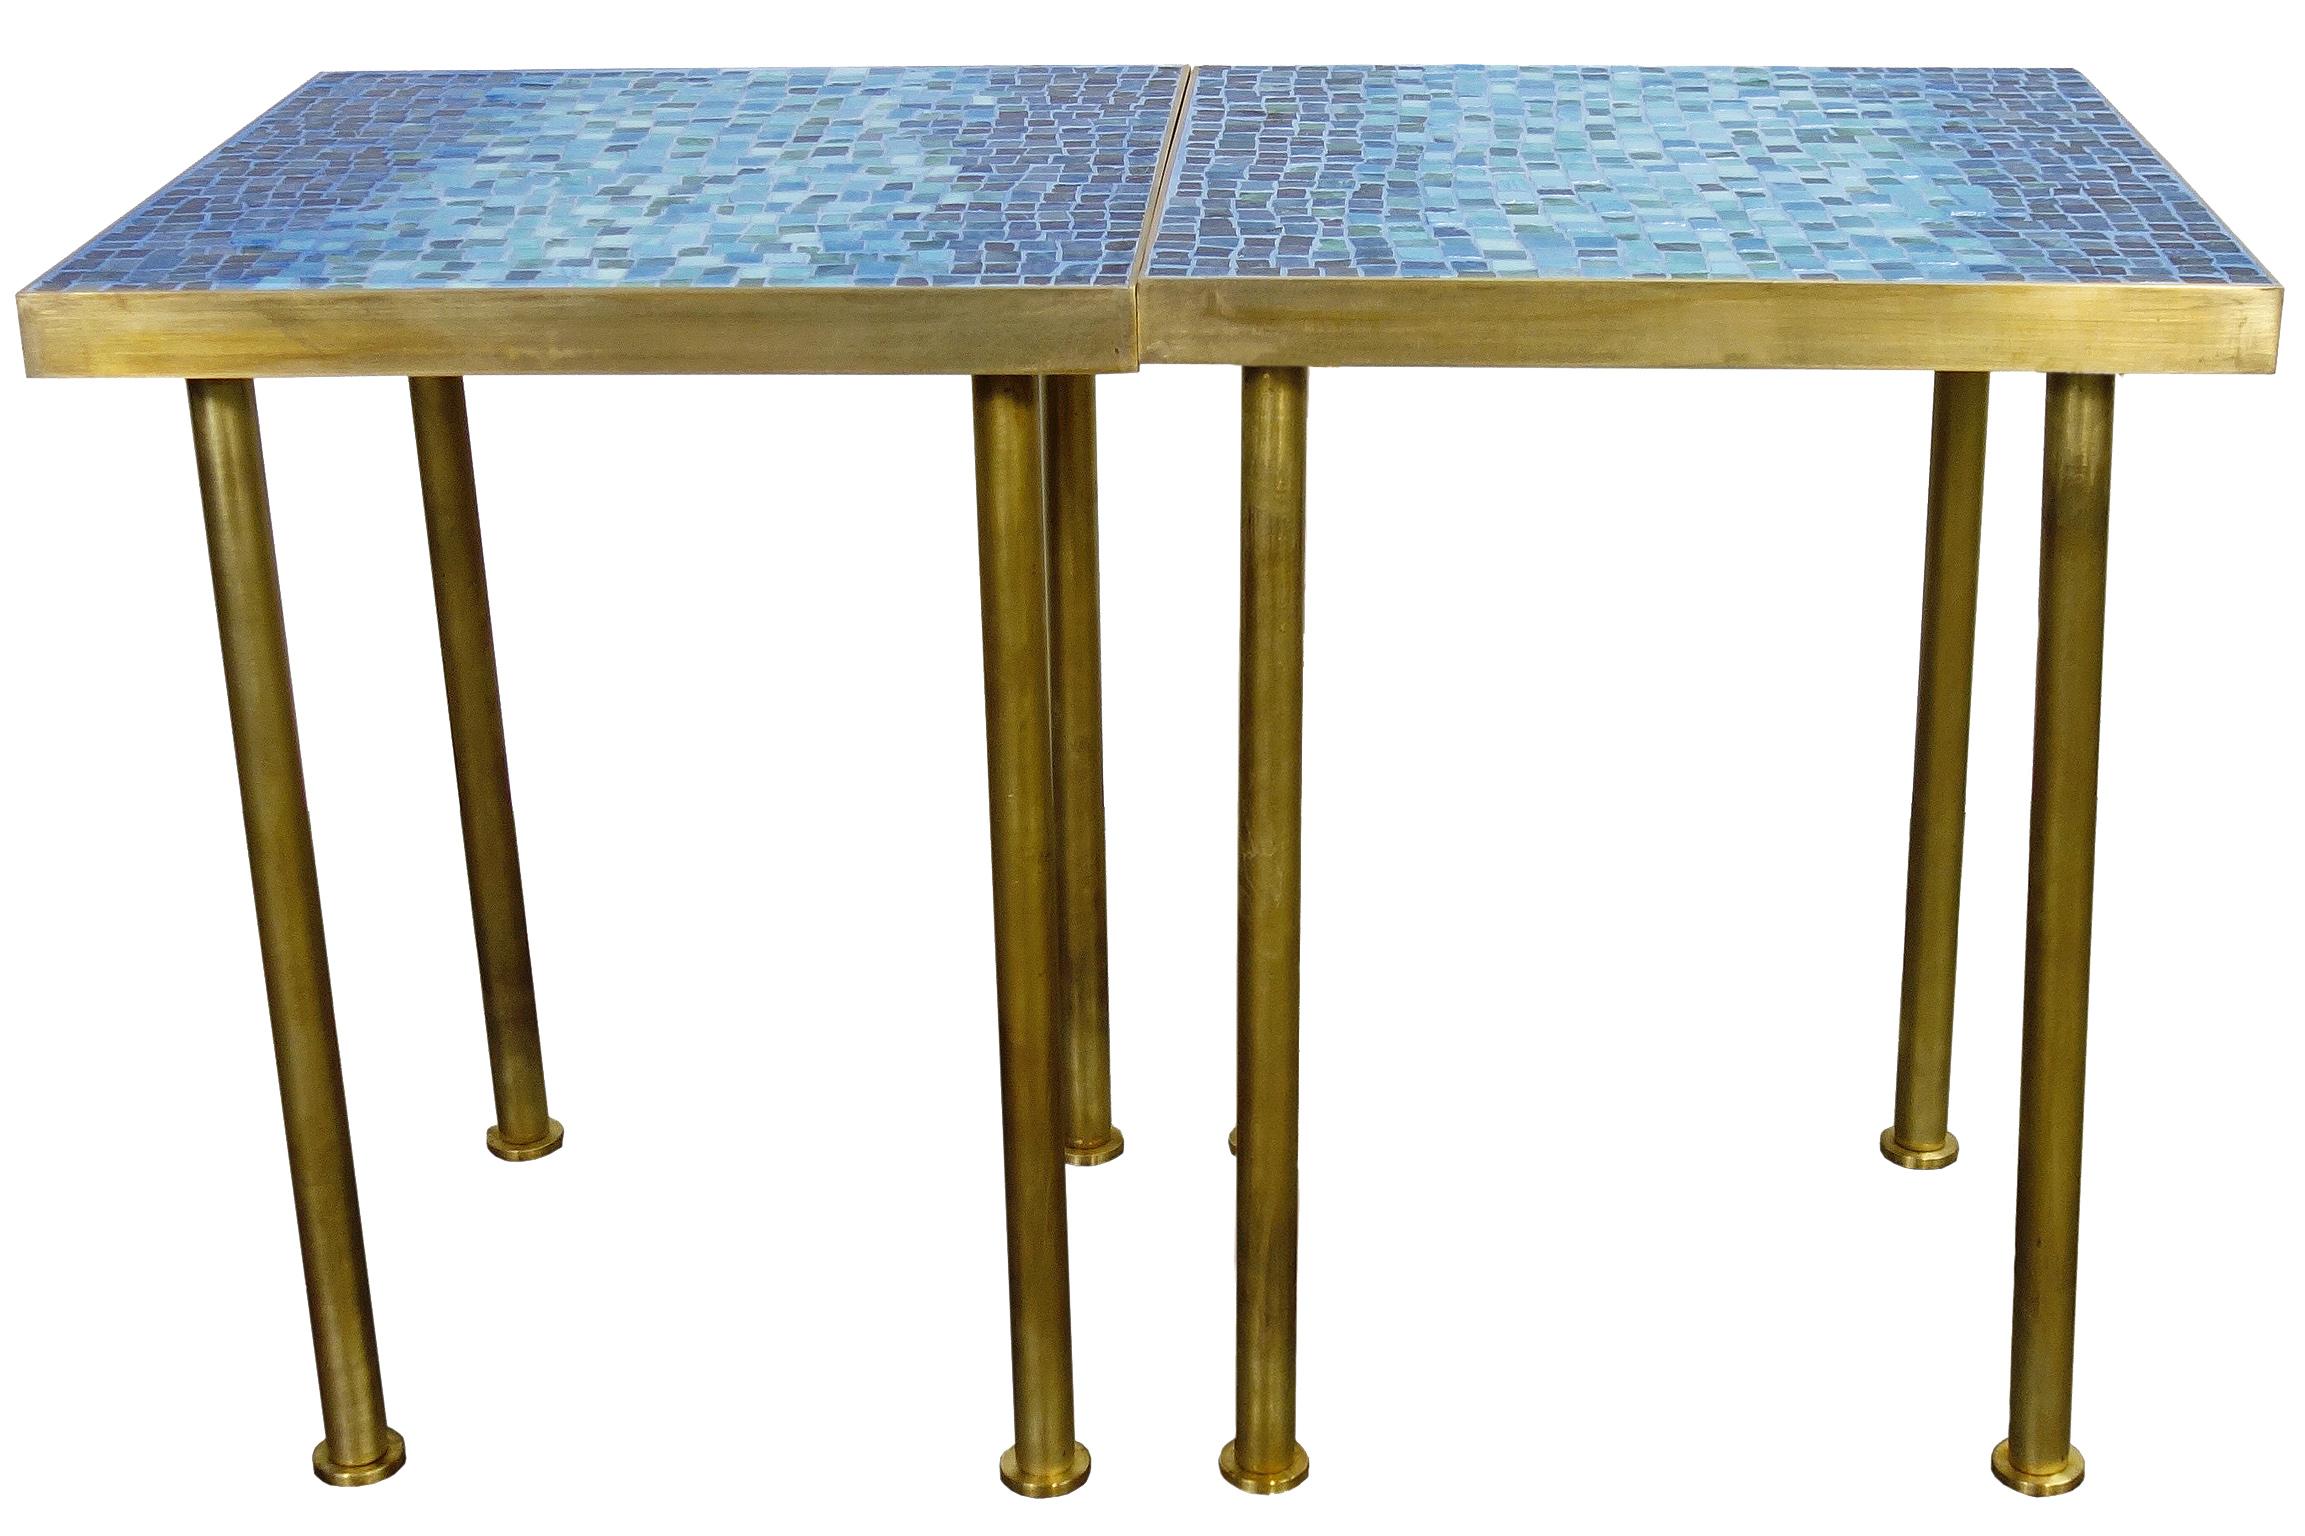 For your consideration is this incredible pair of smalti glass mosaic side tables on a solid brass frame. Wonderful shades of blue will highlight your space with a mid-century aesthetic that can match any decor. . Designed by Yupadee 